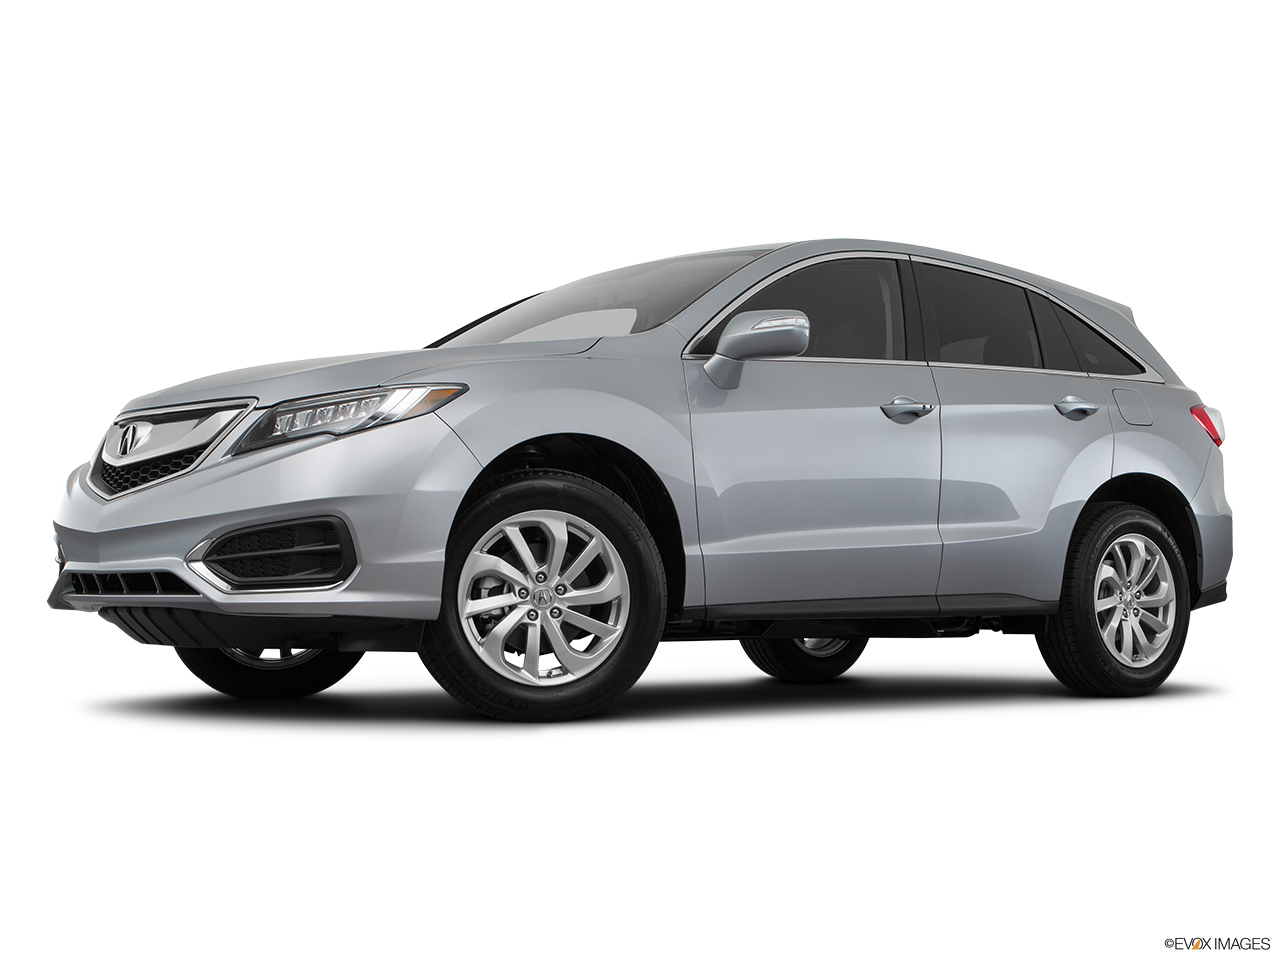 2017 Acura RDX AWD Low/wide front 5/8. 